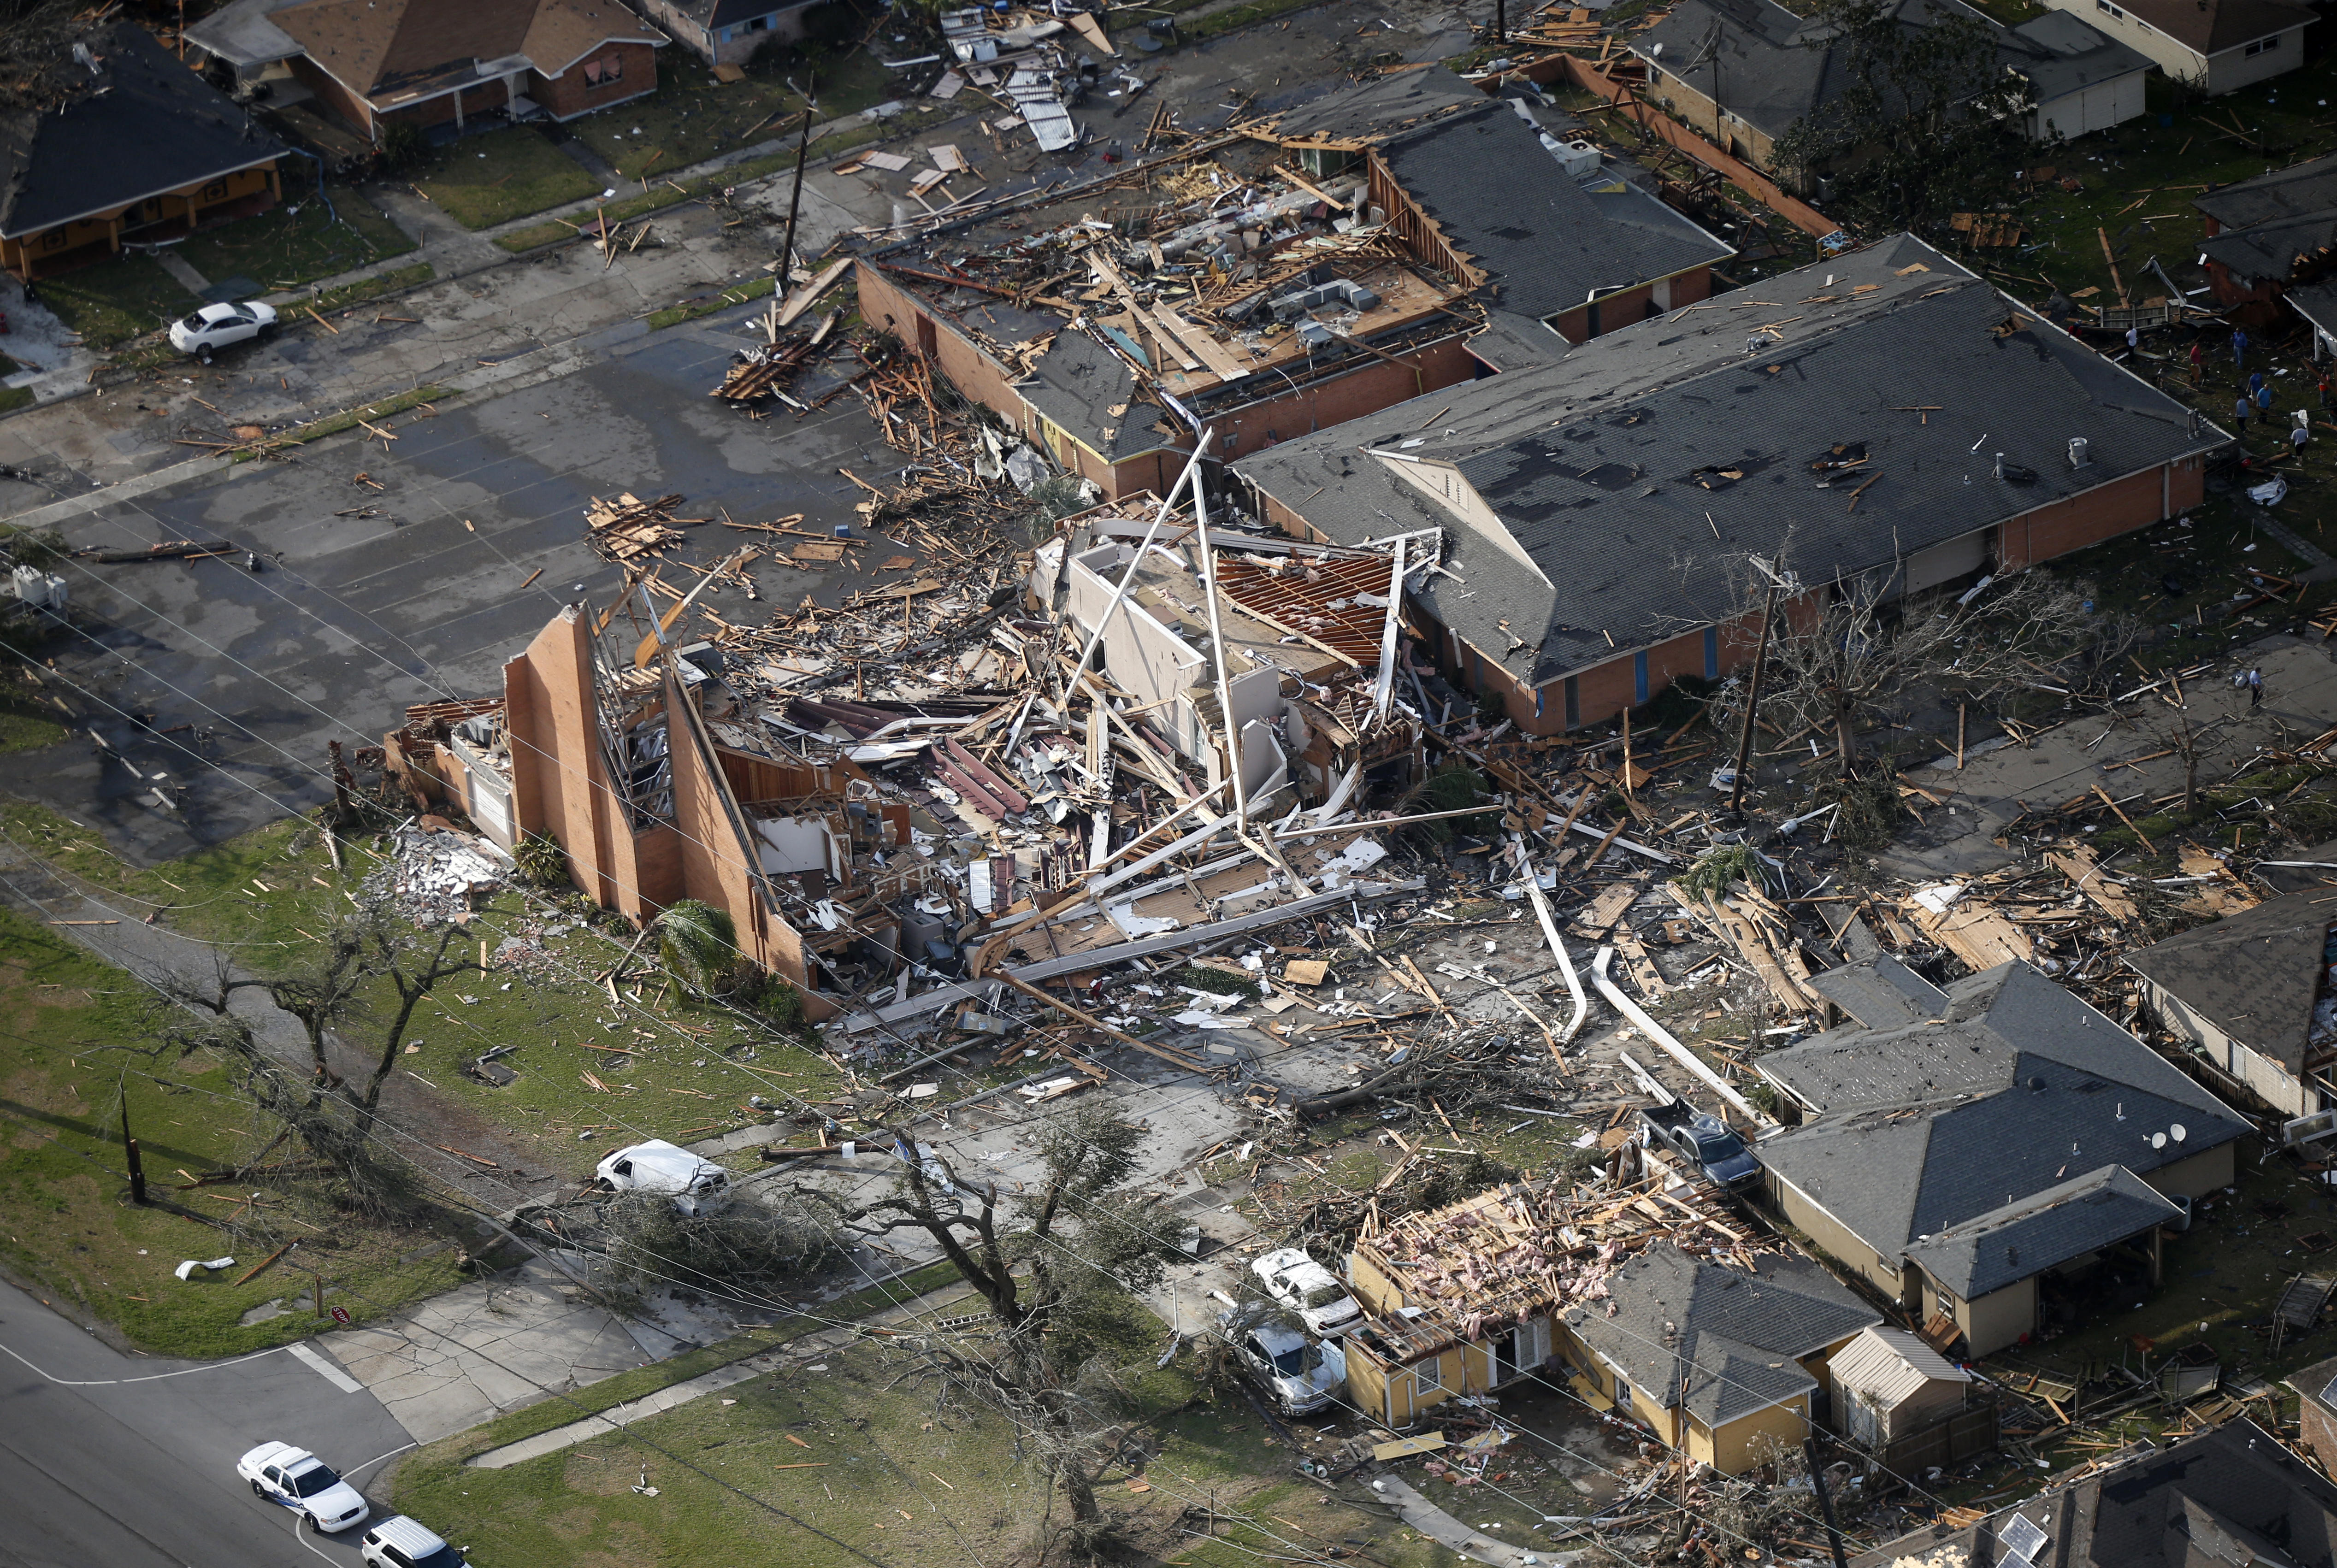 Louisiana in state of emergency after tornadoes cause heavy damage - CBS News5070 x 3402